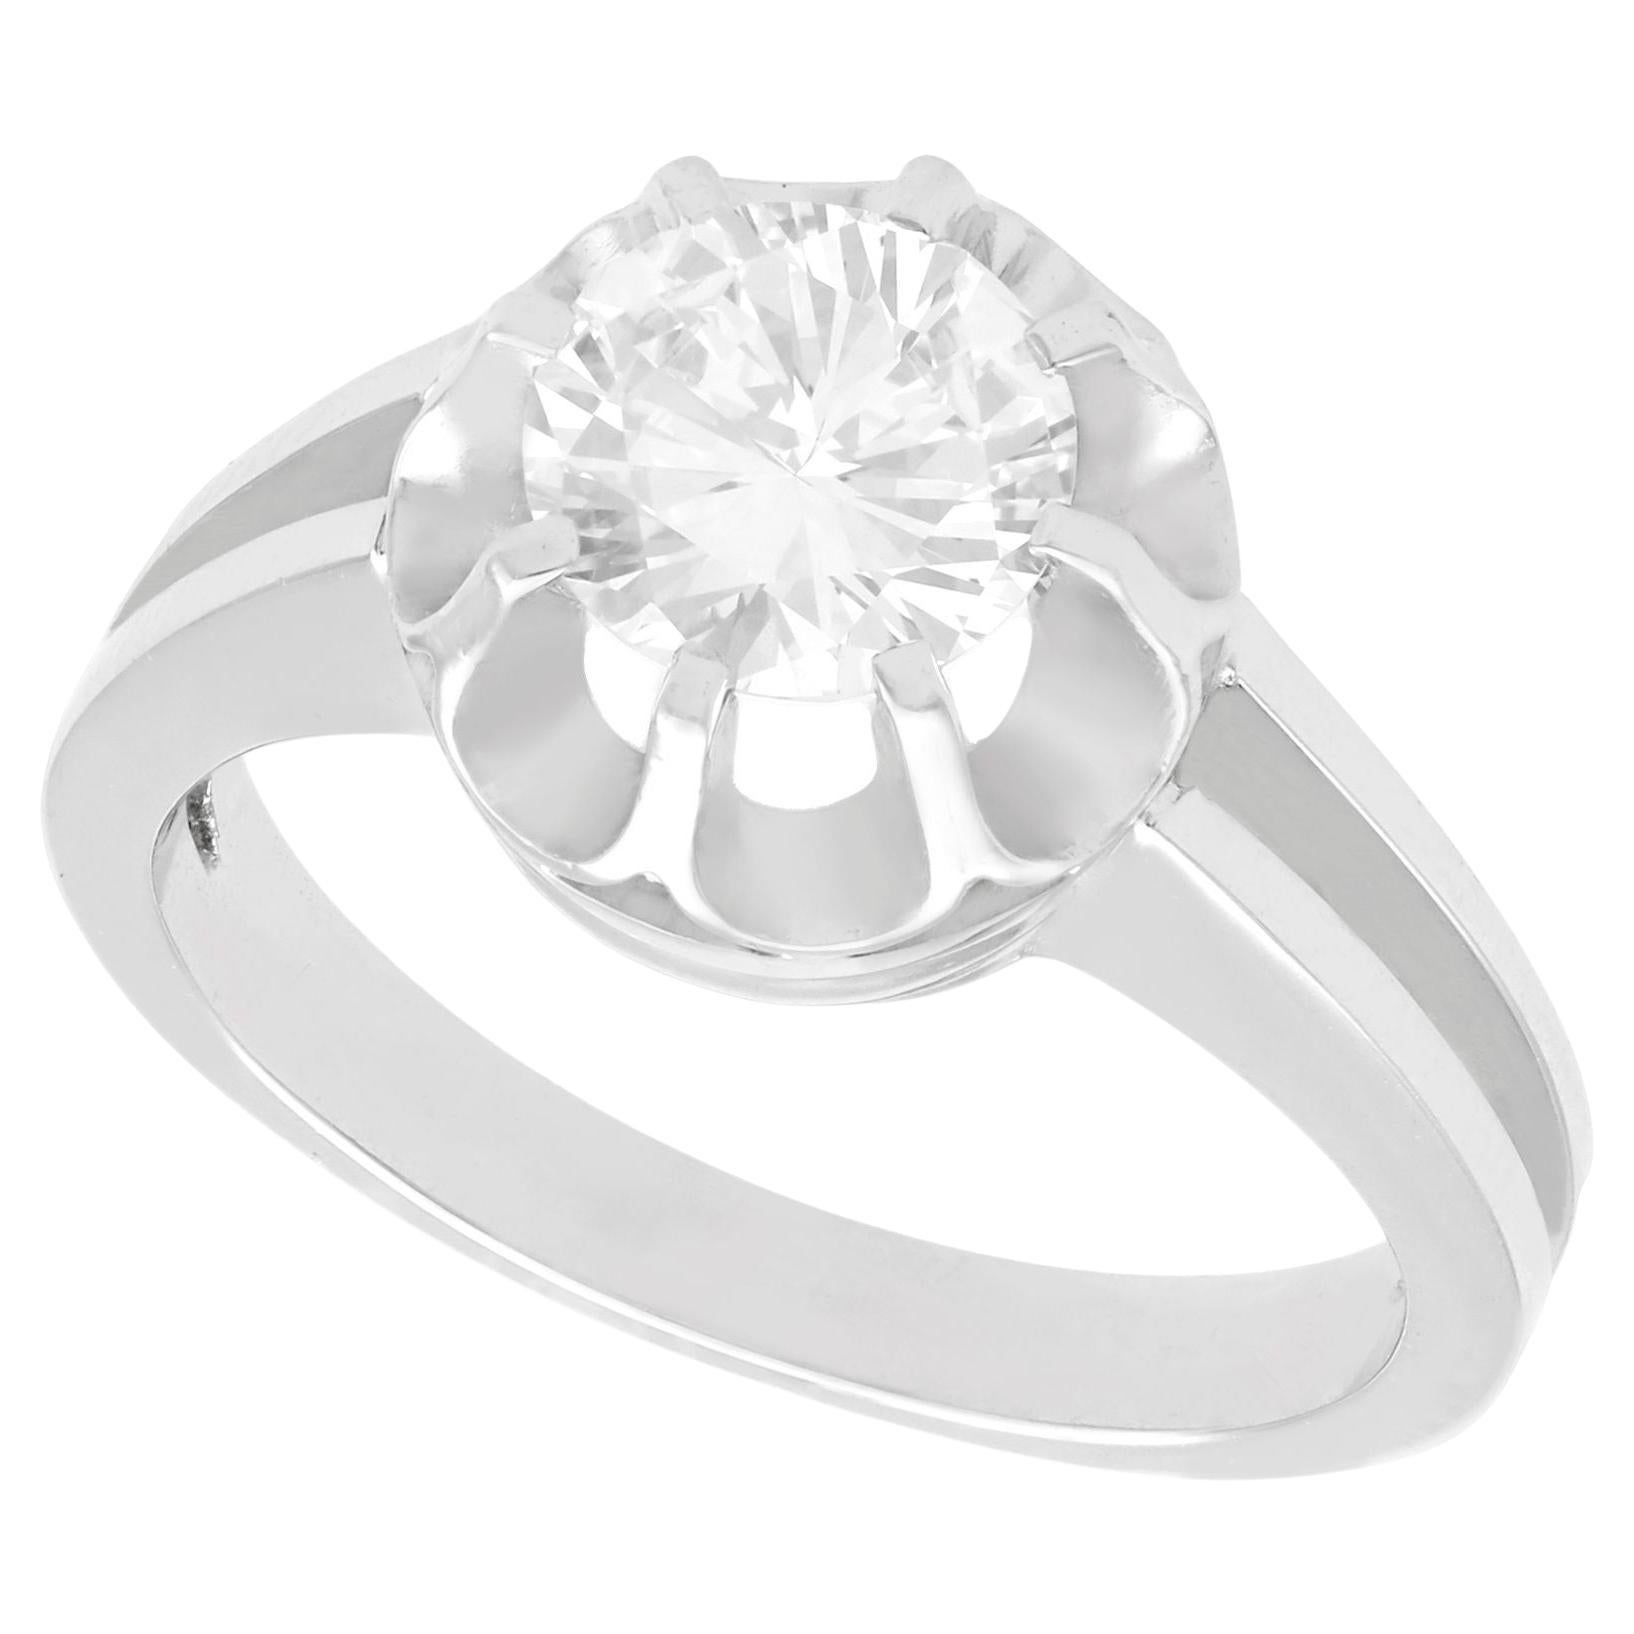 1930s, 1.05 Carat Diamond White Gold Solitaire Engagement Ring